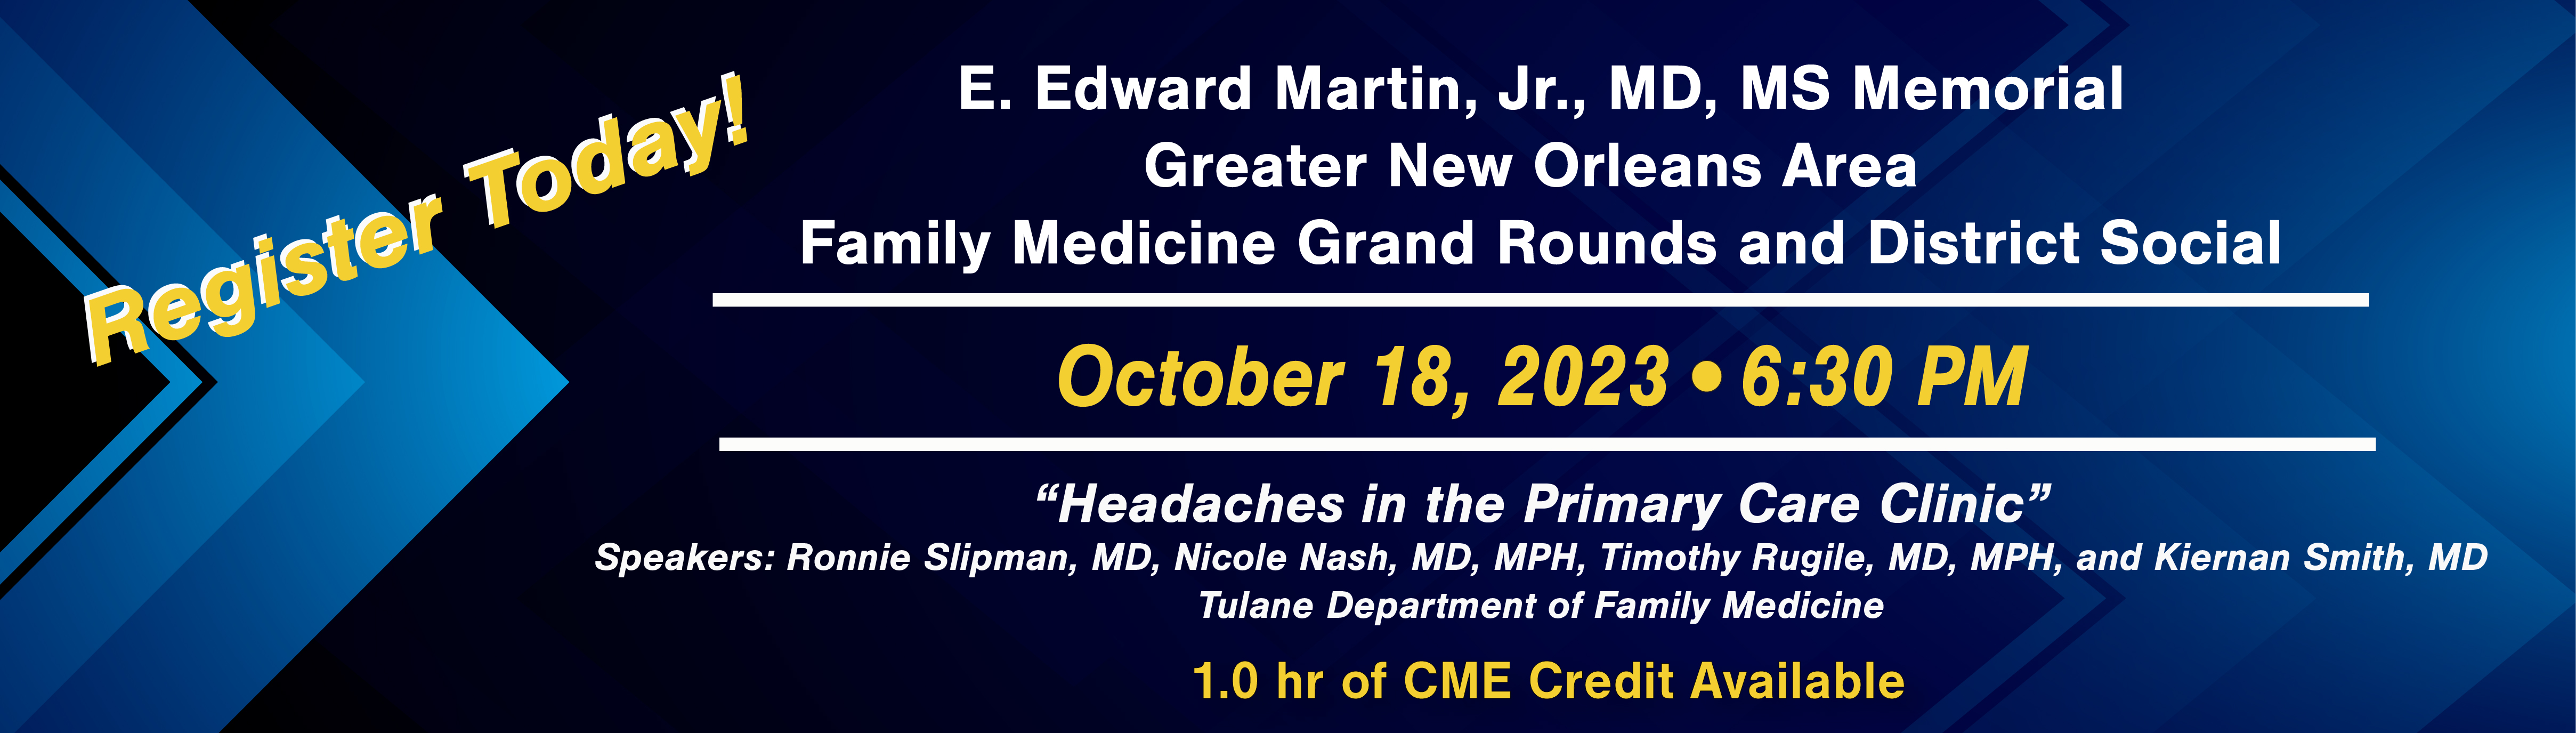 Grand Rounds web banner Register Today 01